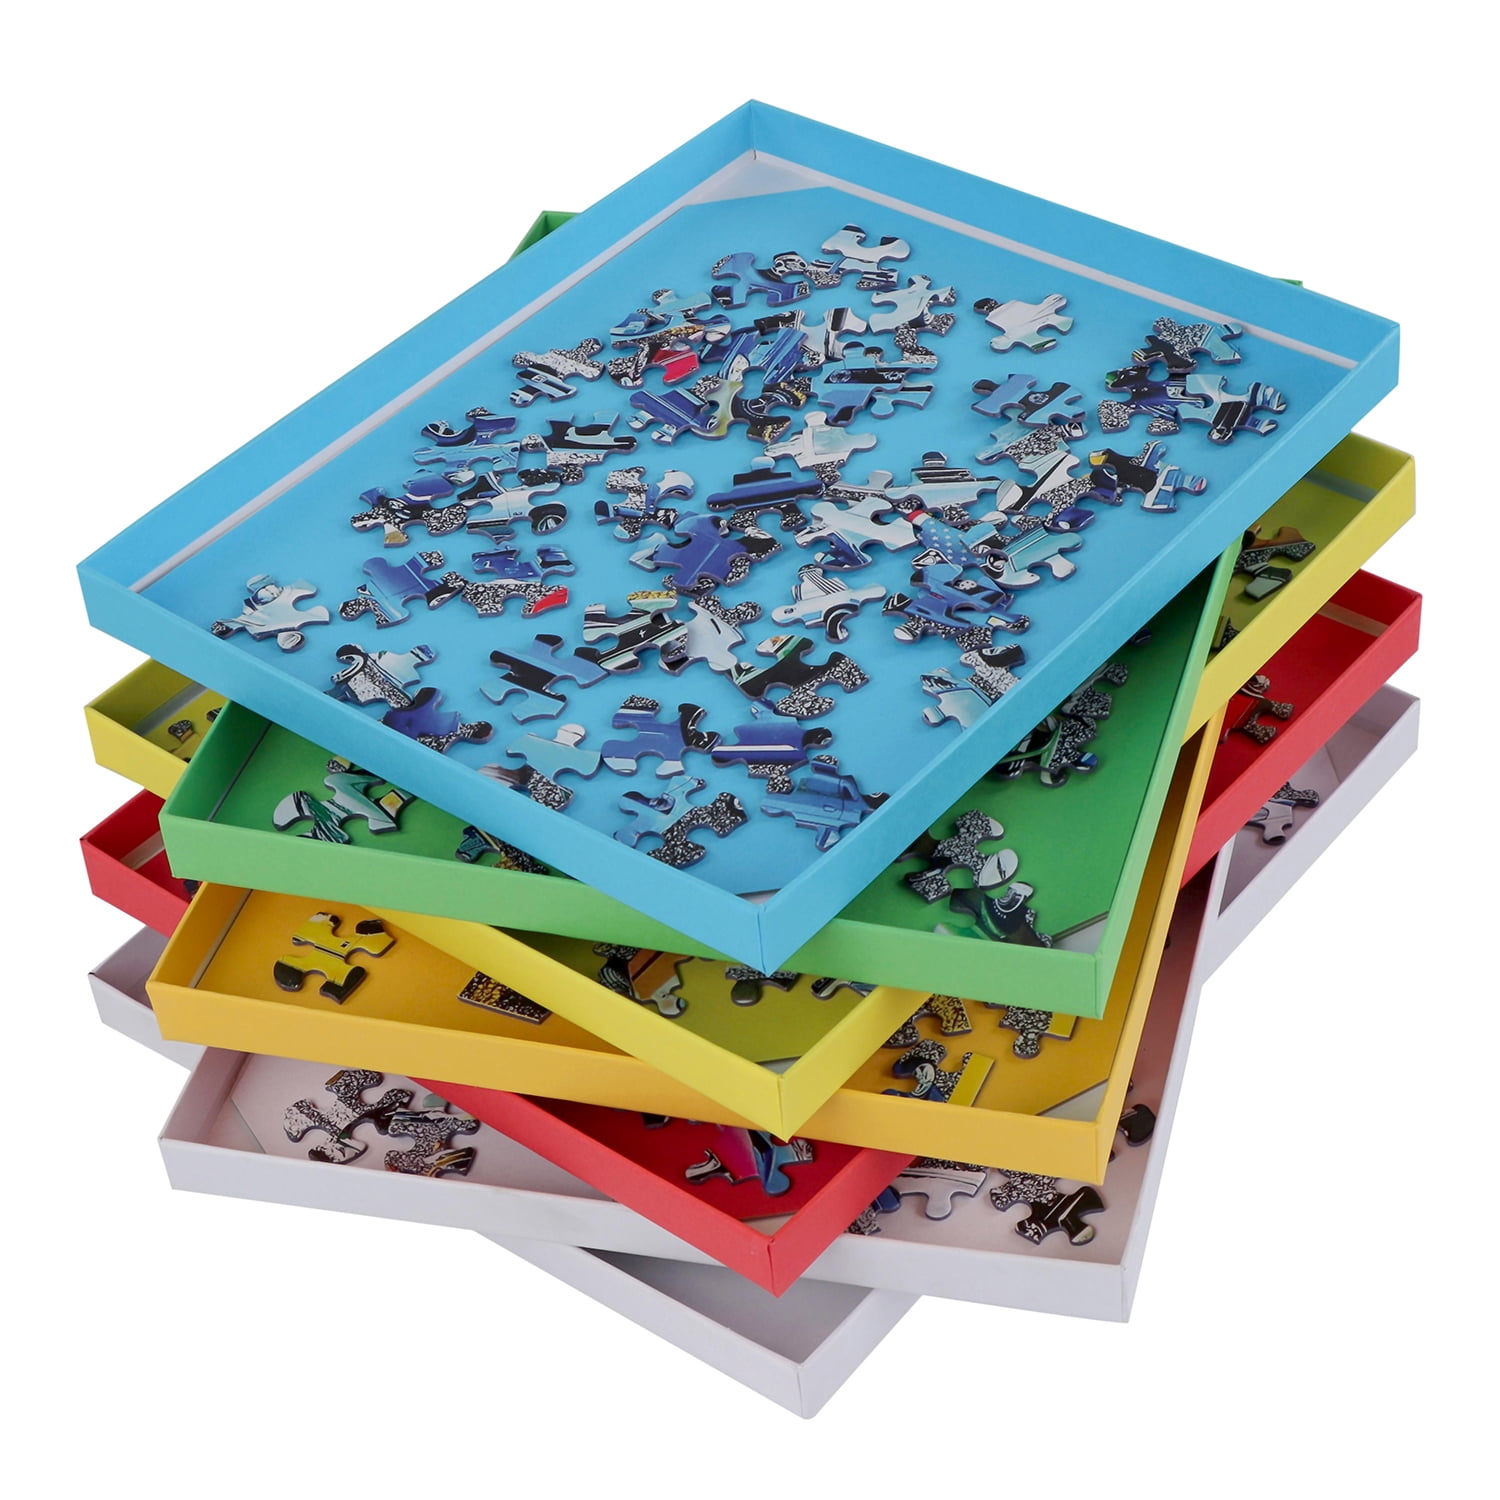 TELY Stiff-Felt Puzzle Board with Cover - Up to 1000 Pieces - Easy